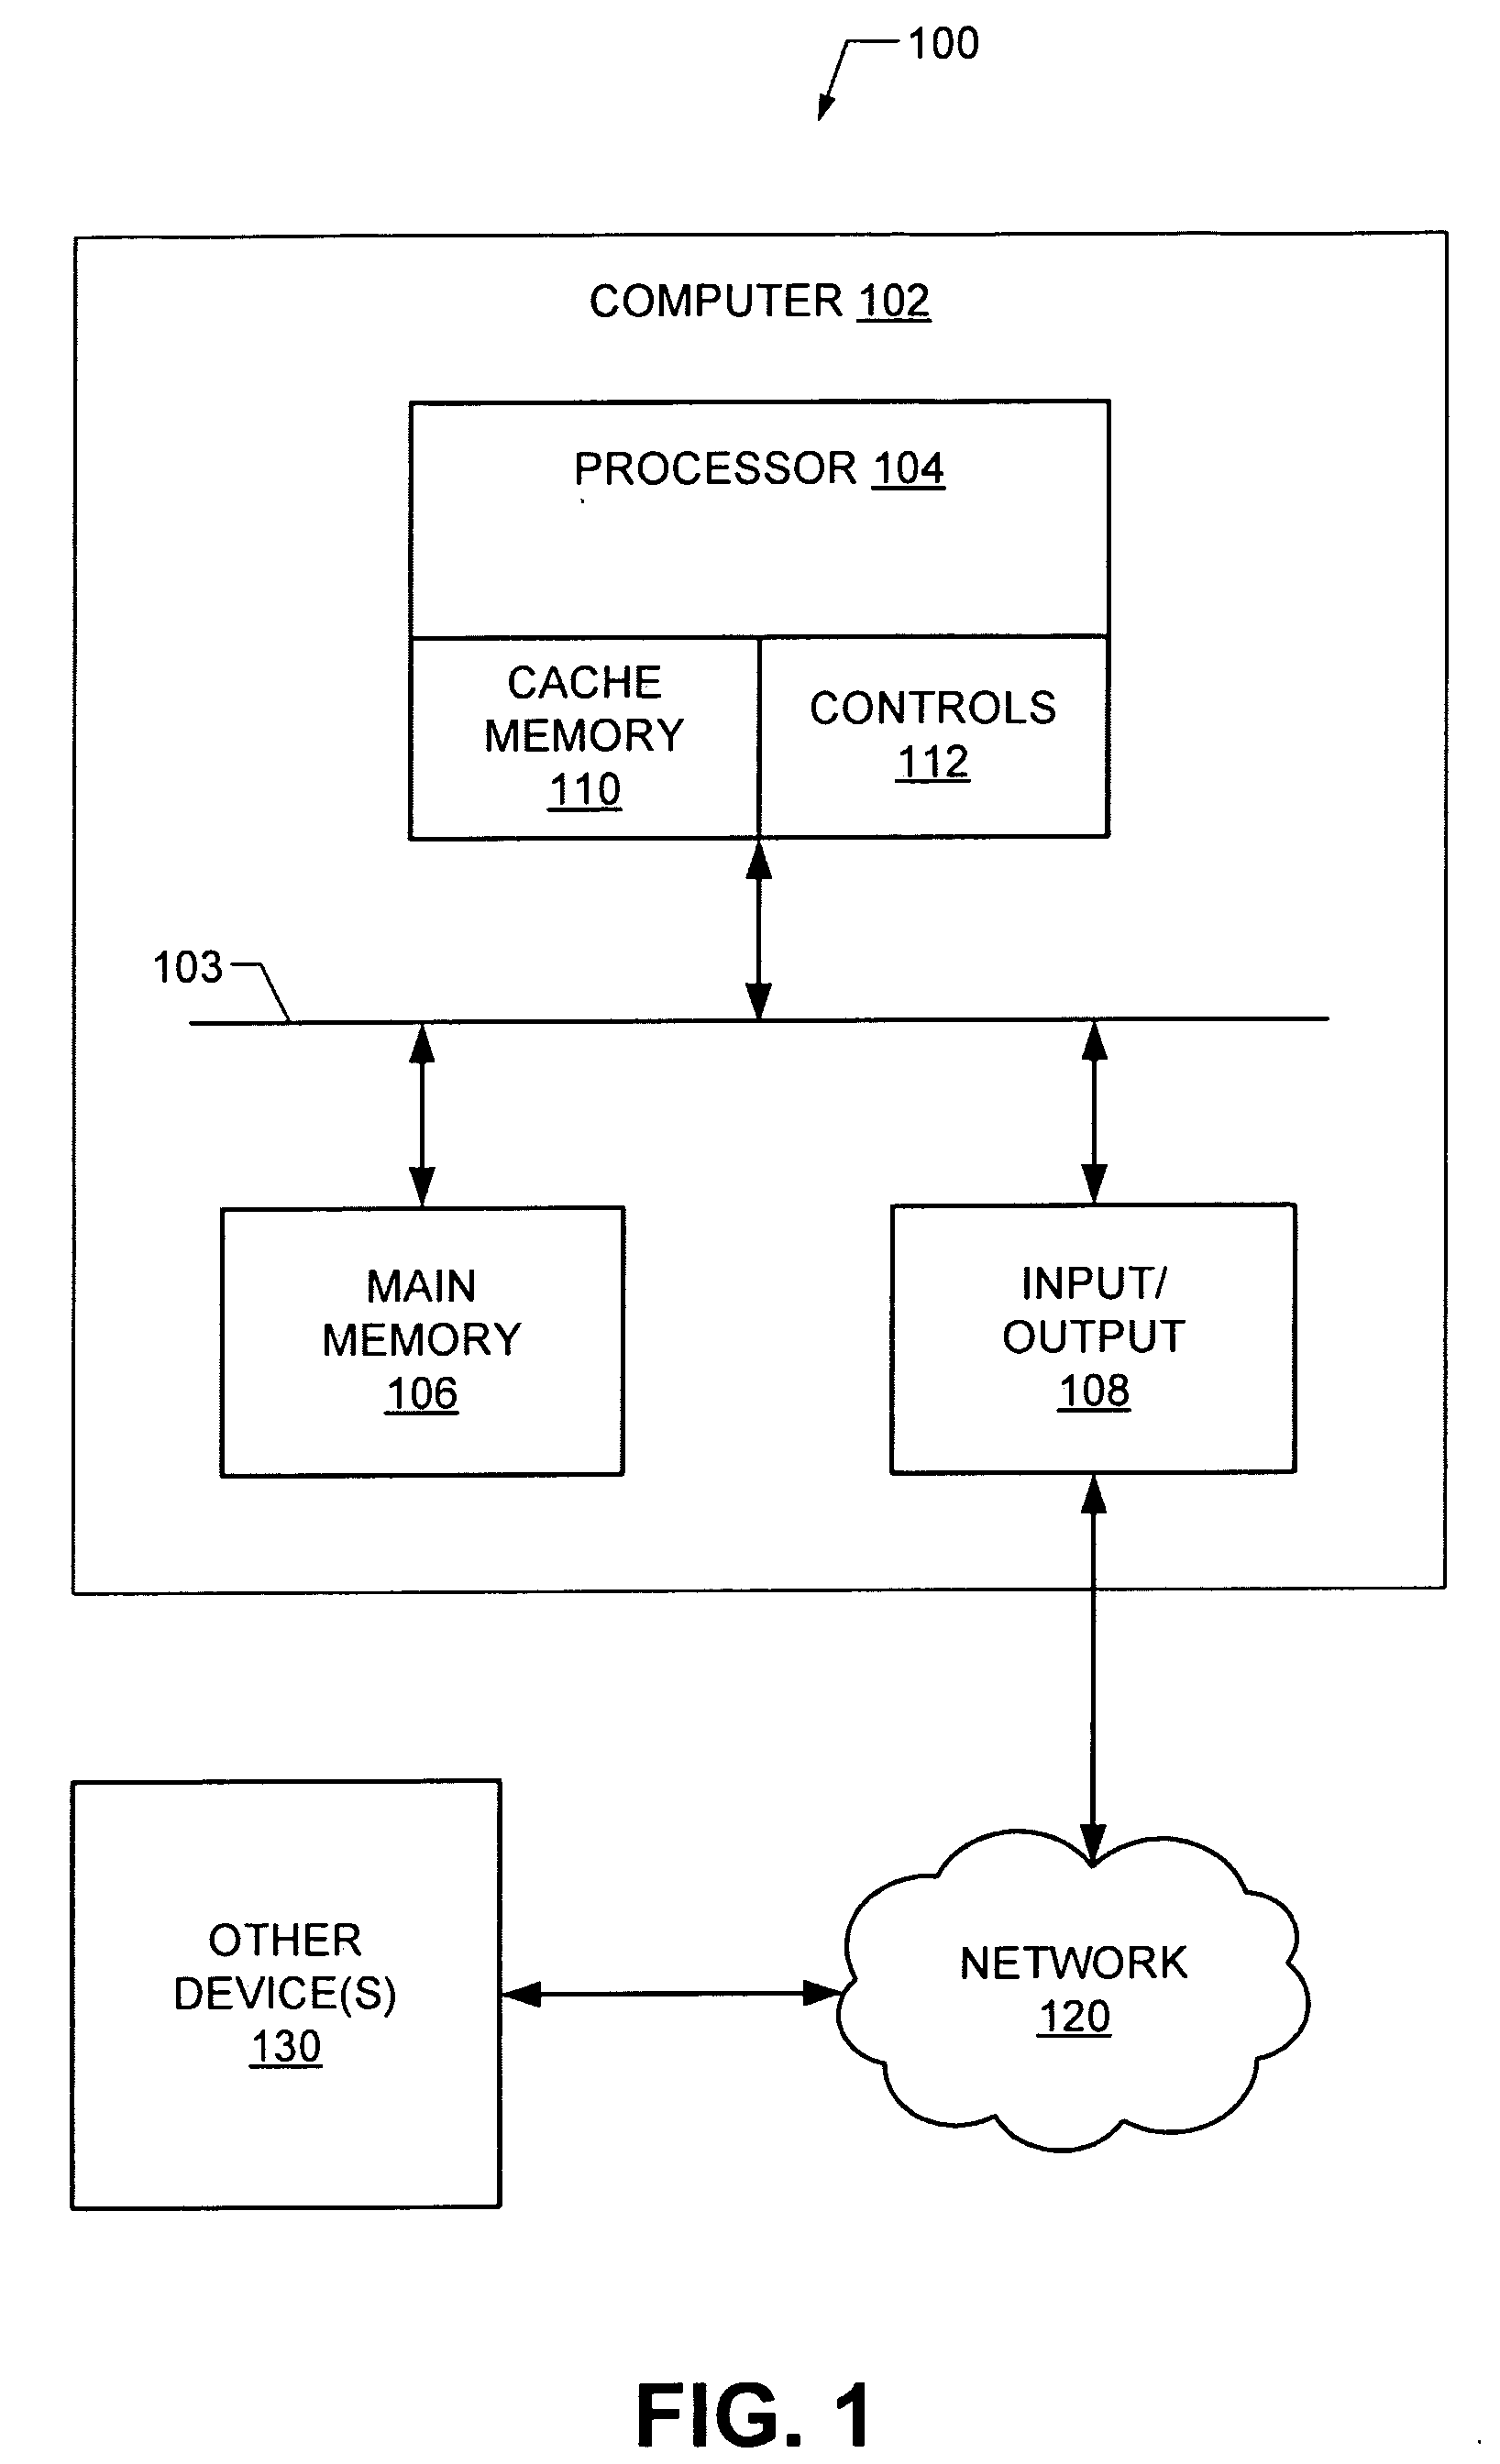 Method, system, and computer program product for reducing cache memory pollution